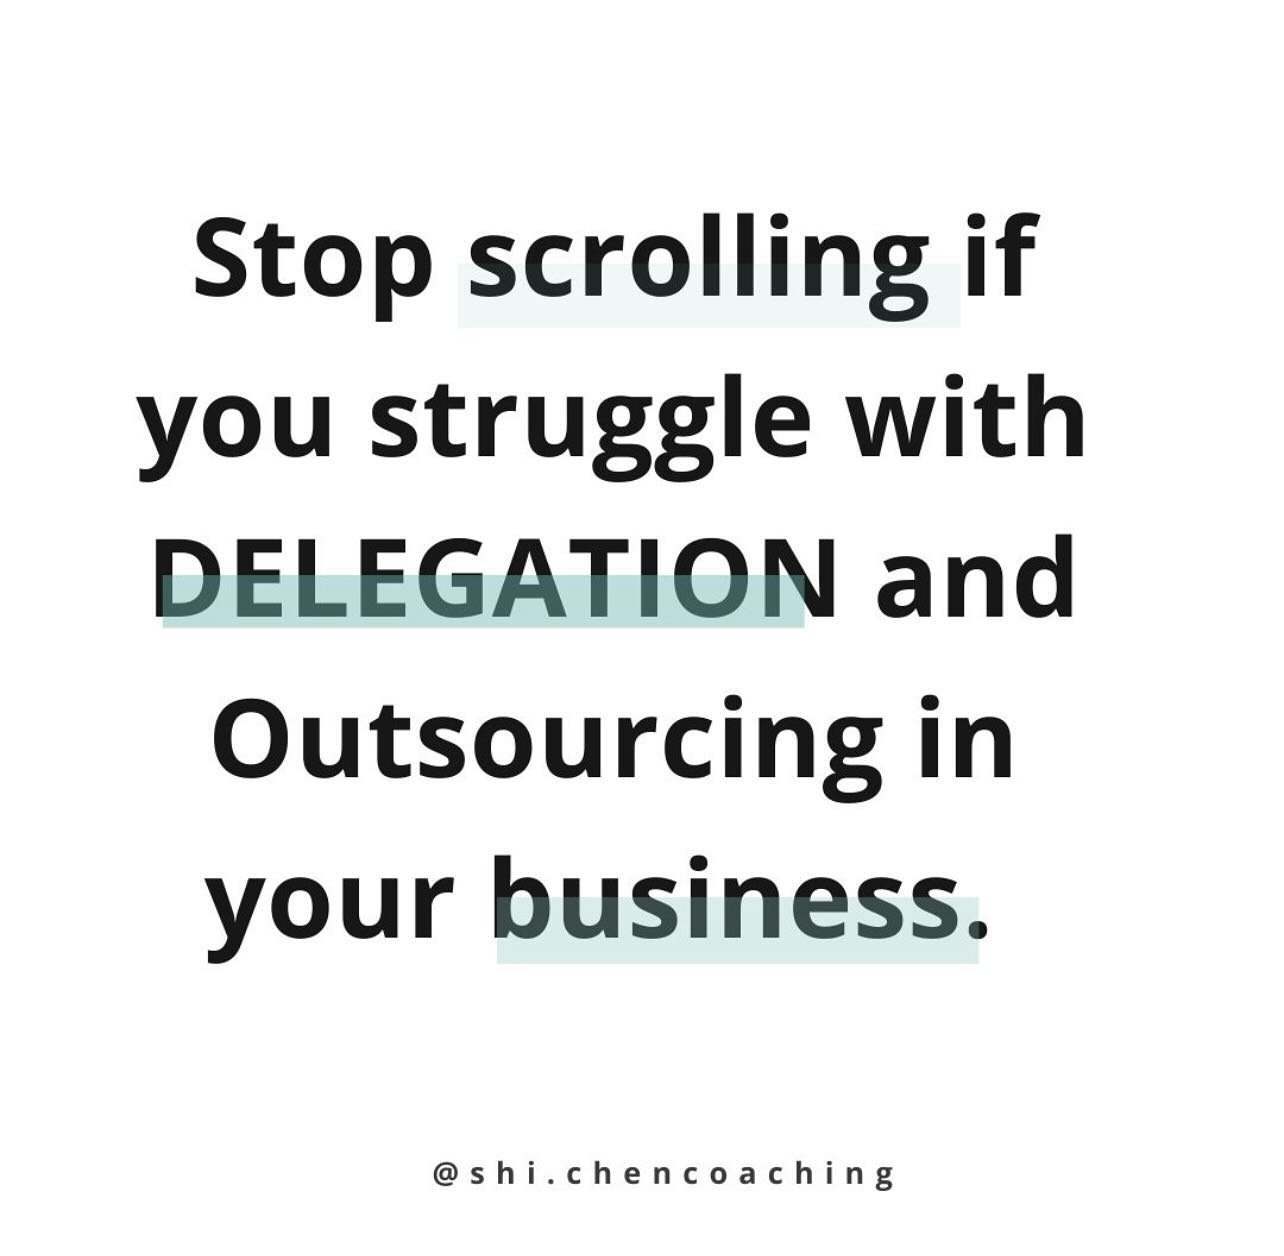 Stop scrolling if you struggle with DELEGATION and Outsourcing in your business. 

Friend, I&rsquo;m here to tell you that:
A) there&rsquo;s nothing wrong with you and 
B) you&rsquo;re not alone

So many of my female entrepreneurs are struggling with